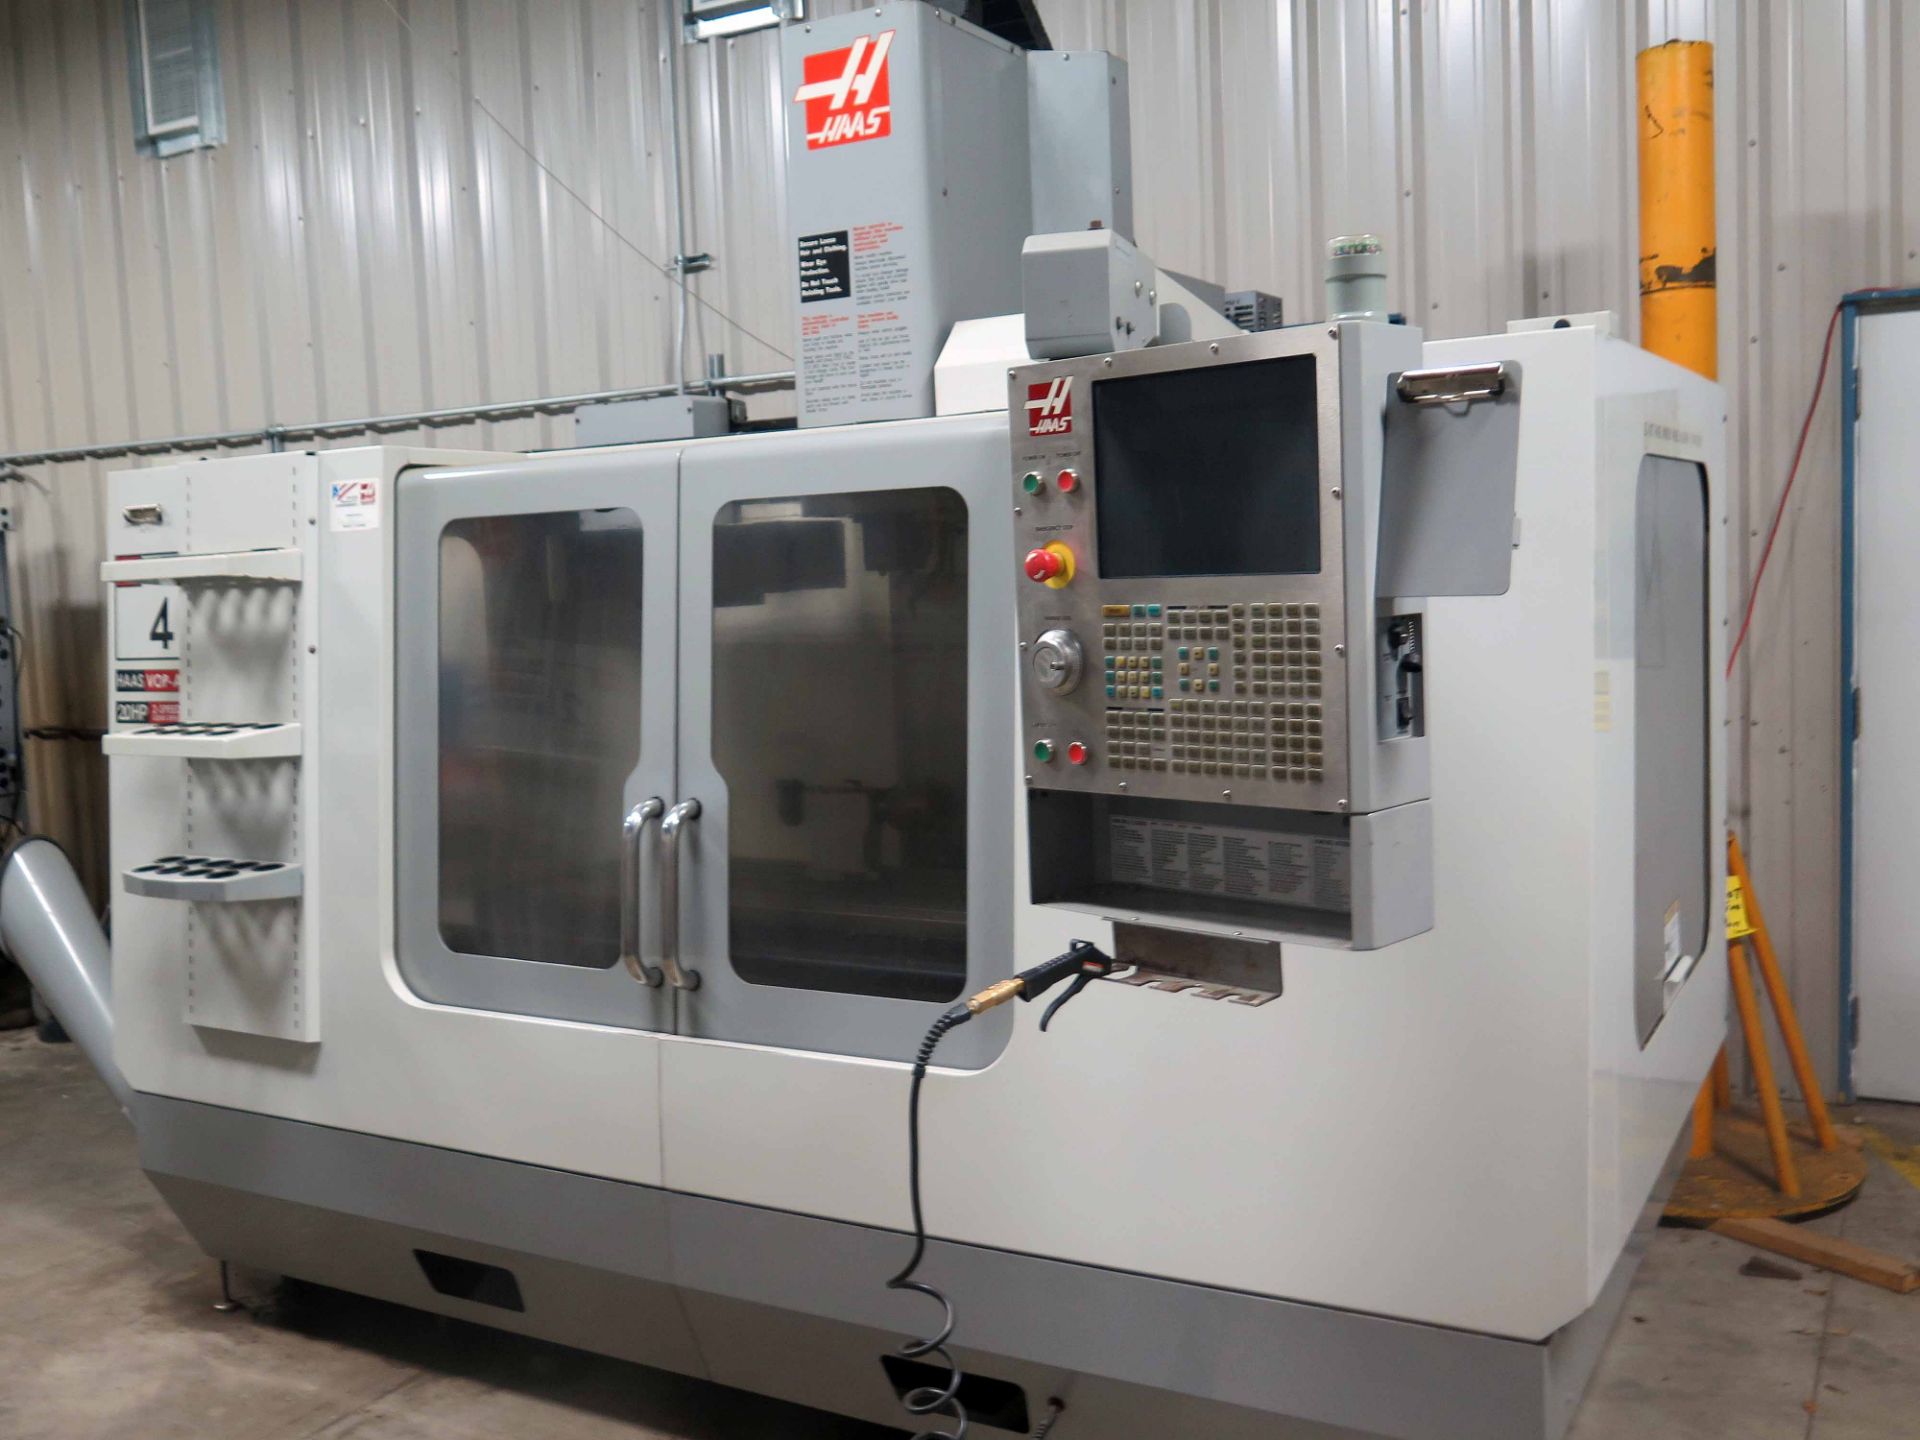 CNC VERTICAL MACHINING CENTER, HAAS MDL. VF-4B, new 2007, Haas V0P-A CNC control, 20 HP 2-spd. - Image 2 of 5